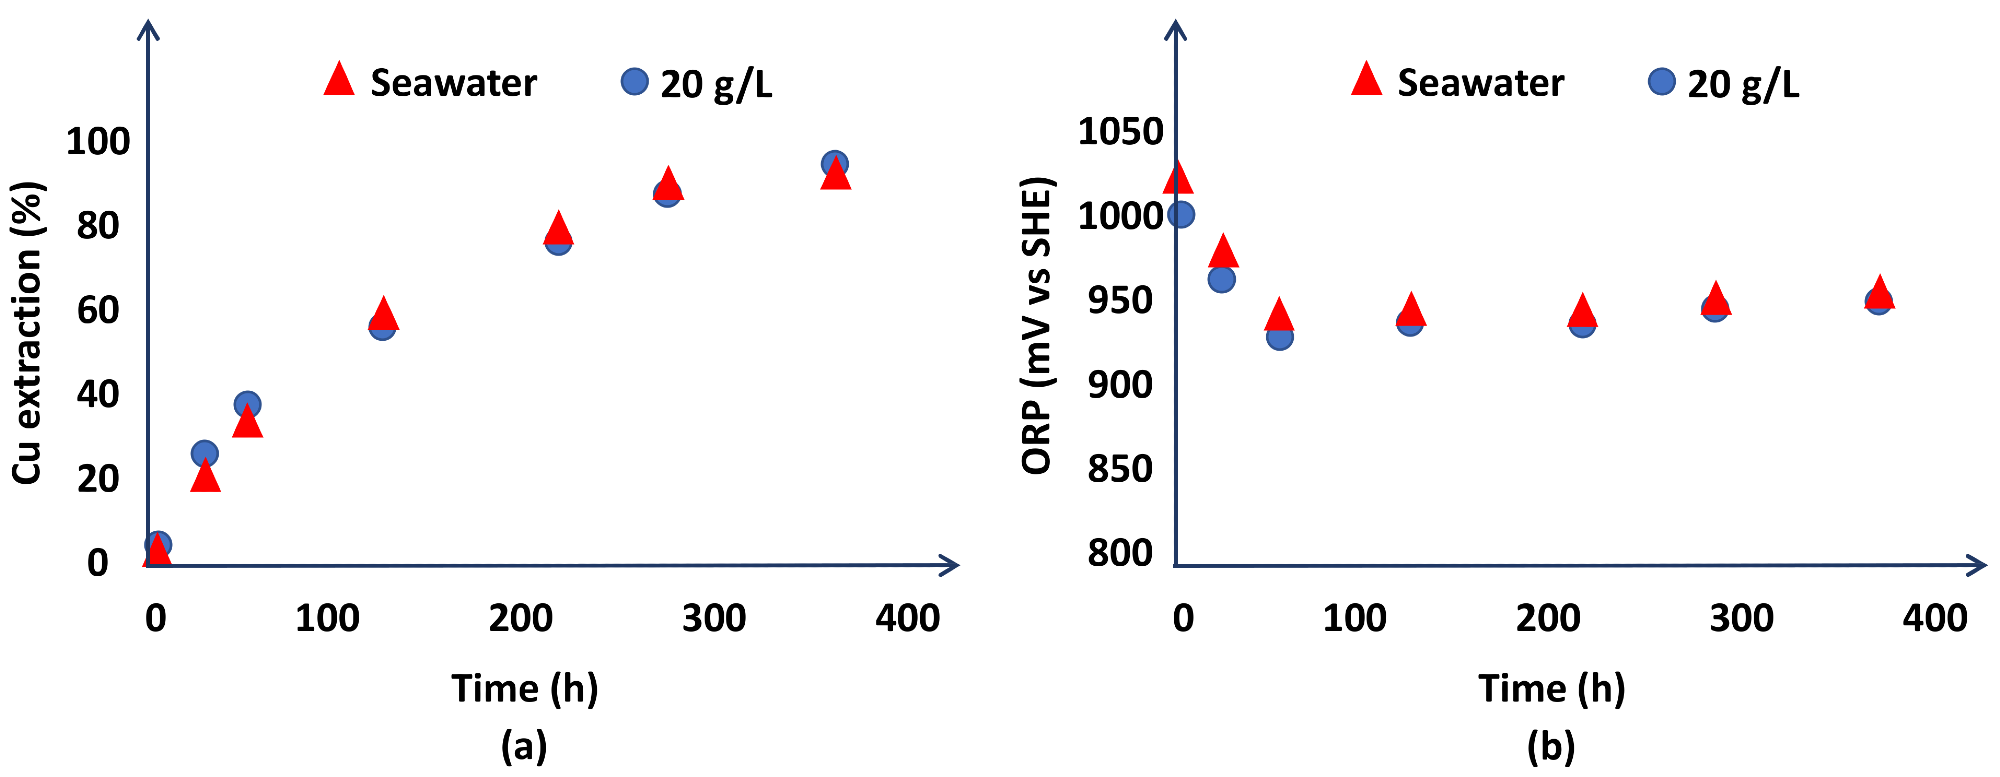 (a) Comparison of copper extraction (%) curve when seawater and water with 20 g/L Cl- were used as water sources in the leach solution. (b) Redox potential (mV) versus time (h) when seawater and water with 20 g/L Cl- were used as a source of water in the leach solution. Experimental conditions: [NaNO3] = [H2SO4] = 0.7 M, 45 °C and sample A.